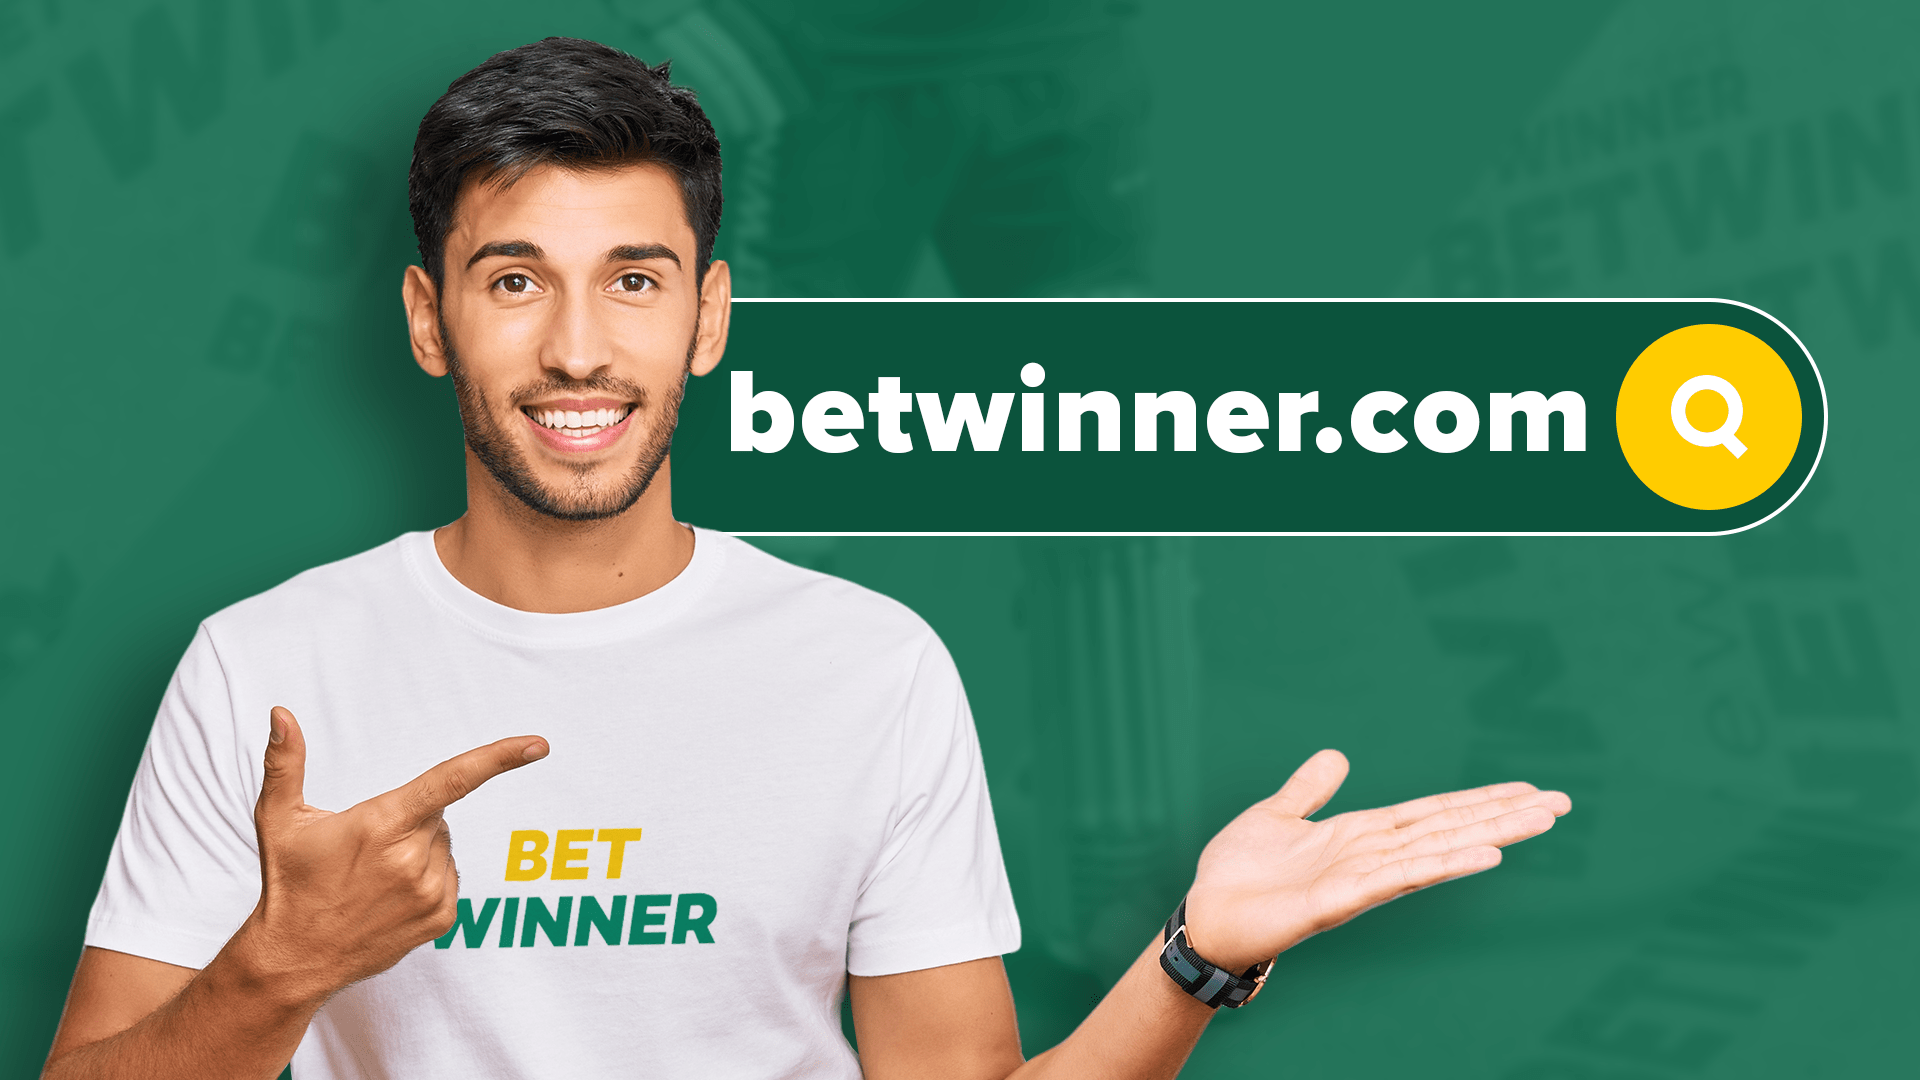 How To Make Your betwinner iphone Look Amazing In 5 Days